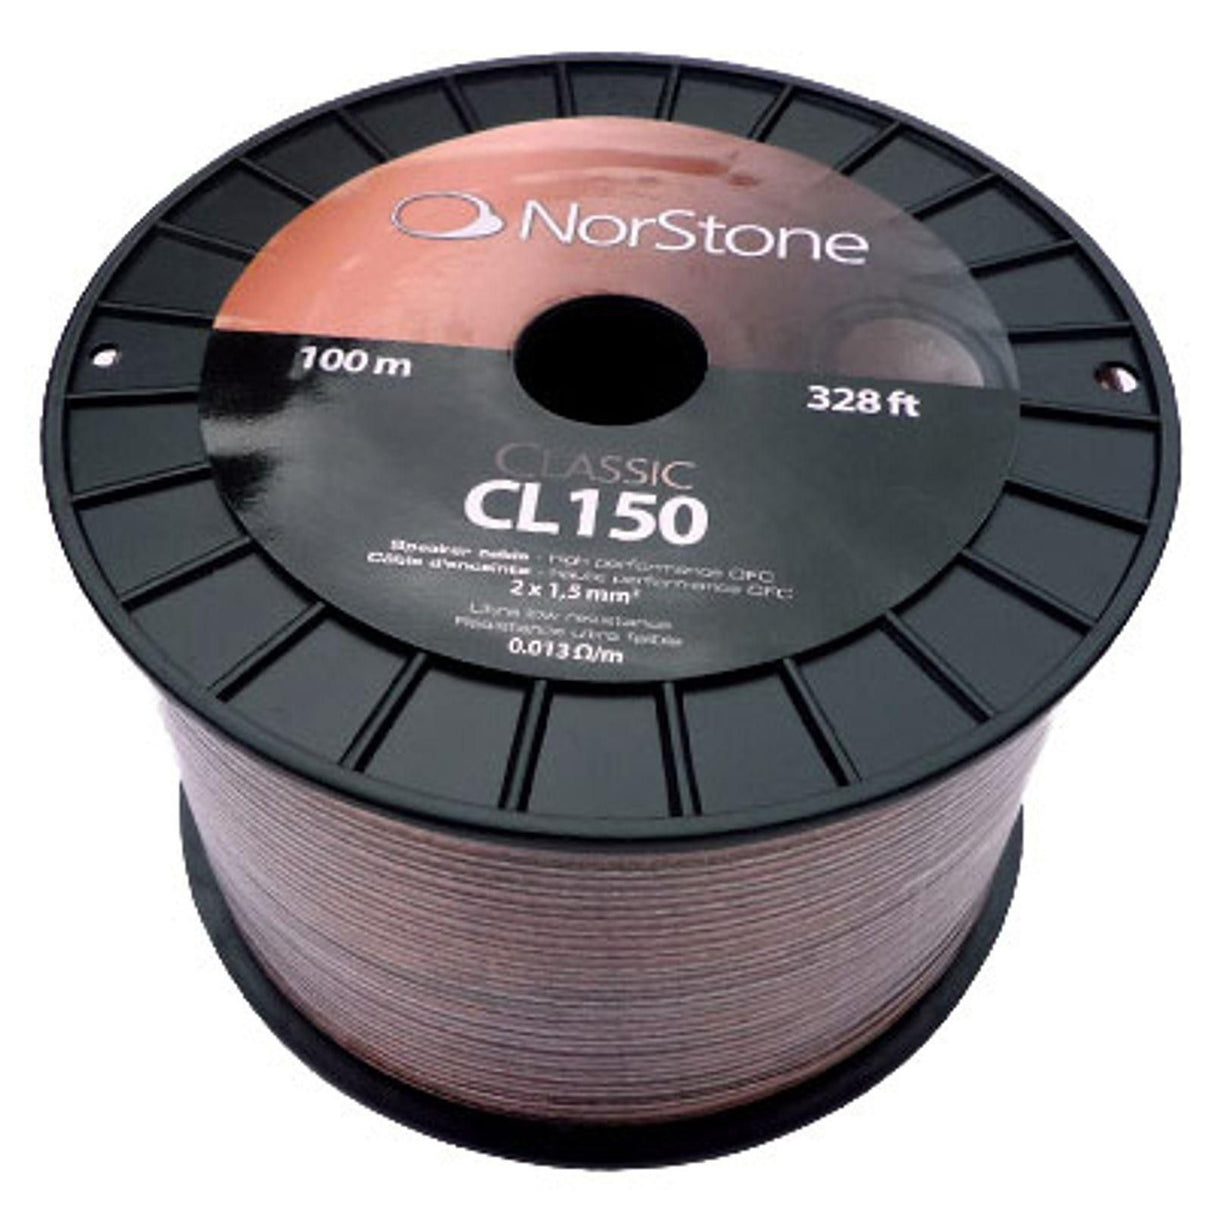 Norstone Classic Speaker Cable CL 150 - 100 Meter (16 Gauge)